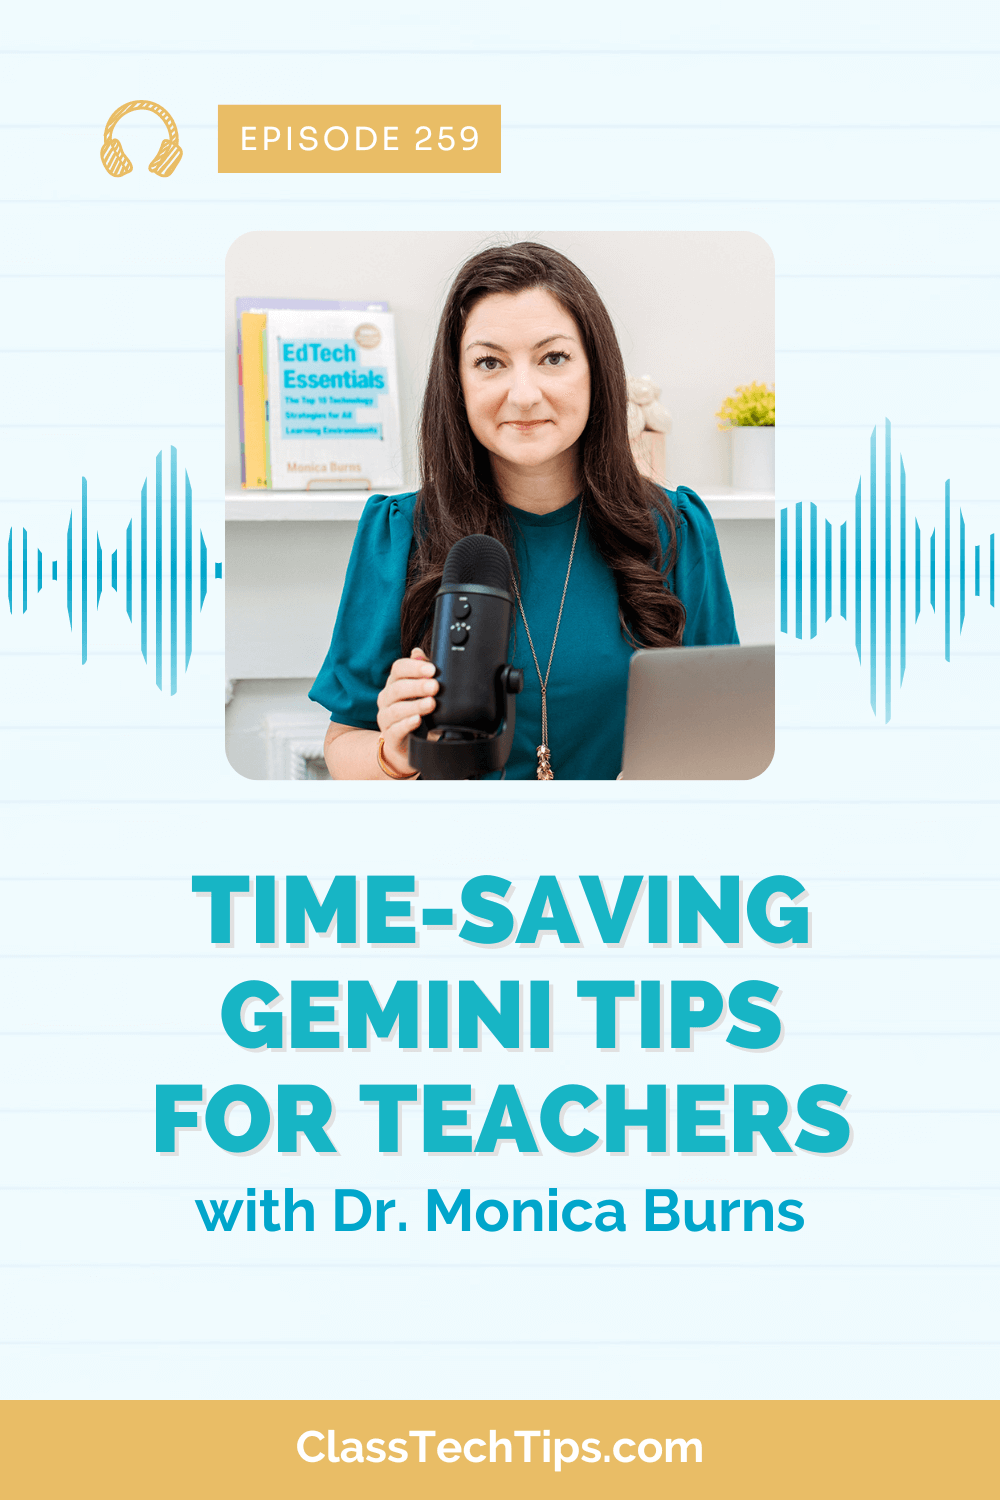 Podcast episode graphic for "Time-Saving Gemini Tips for Teachers - 259" featuring Dr. Monica Burns. She is pictured with a microphone and laptop, with the book "EdTech Essentials" in the background, indicating a focus on educational technology and AI integration in teaching.